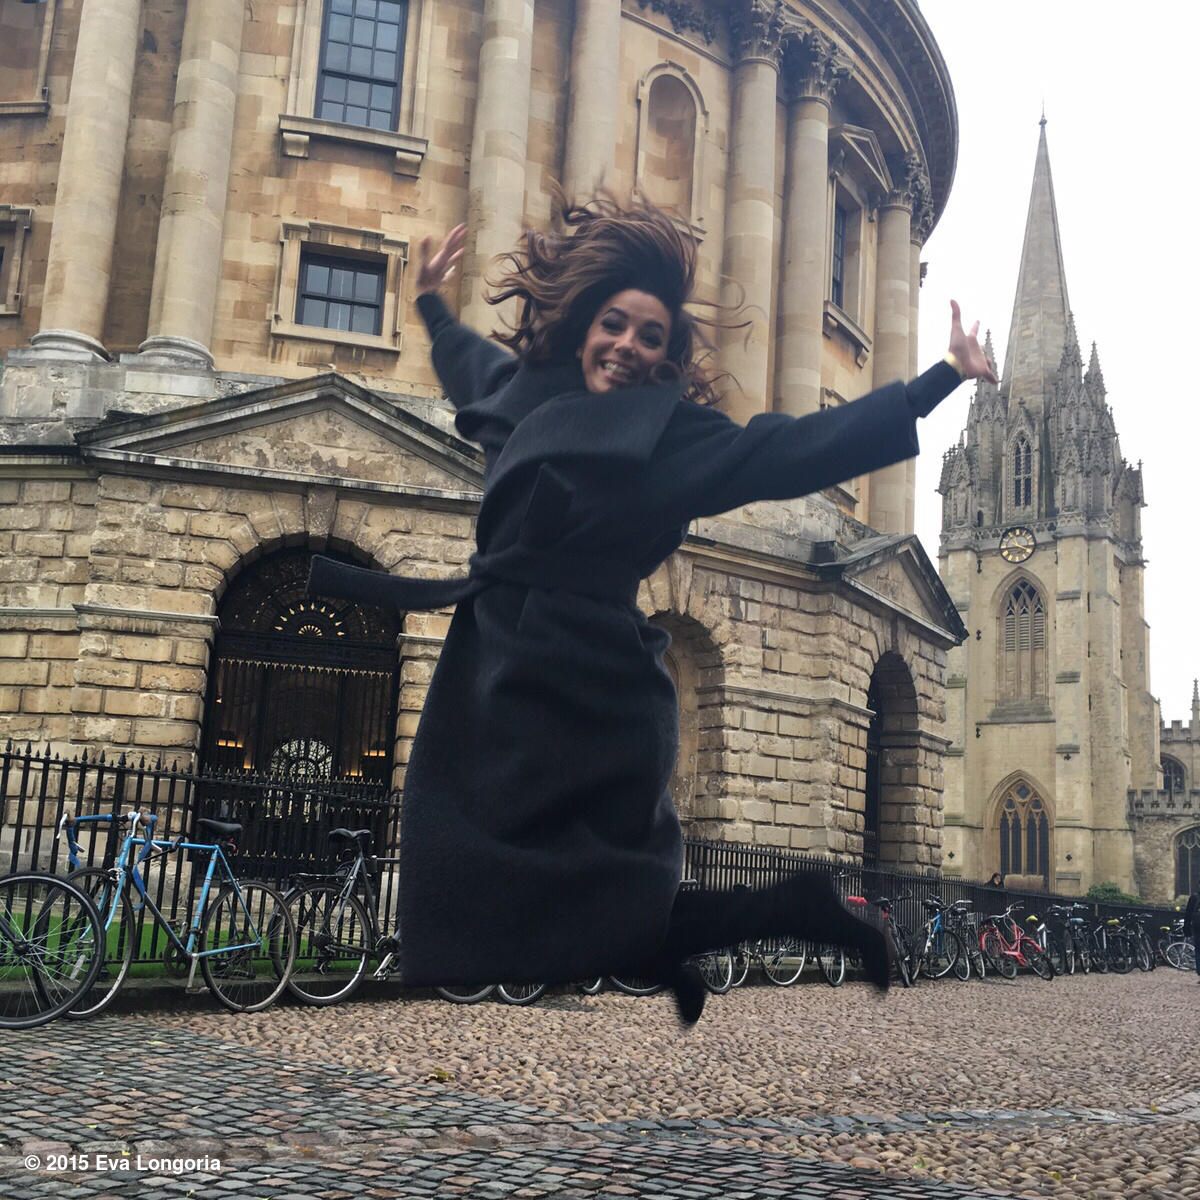 Having some fun at Oxford University earlier today! https://t.co/tFVnTCPKbf